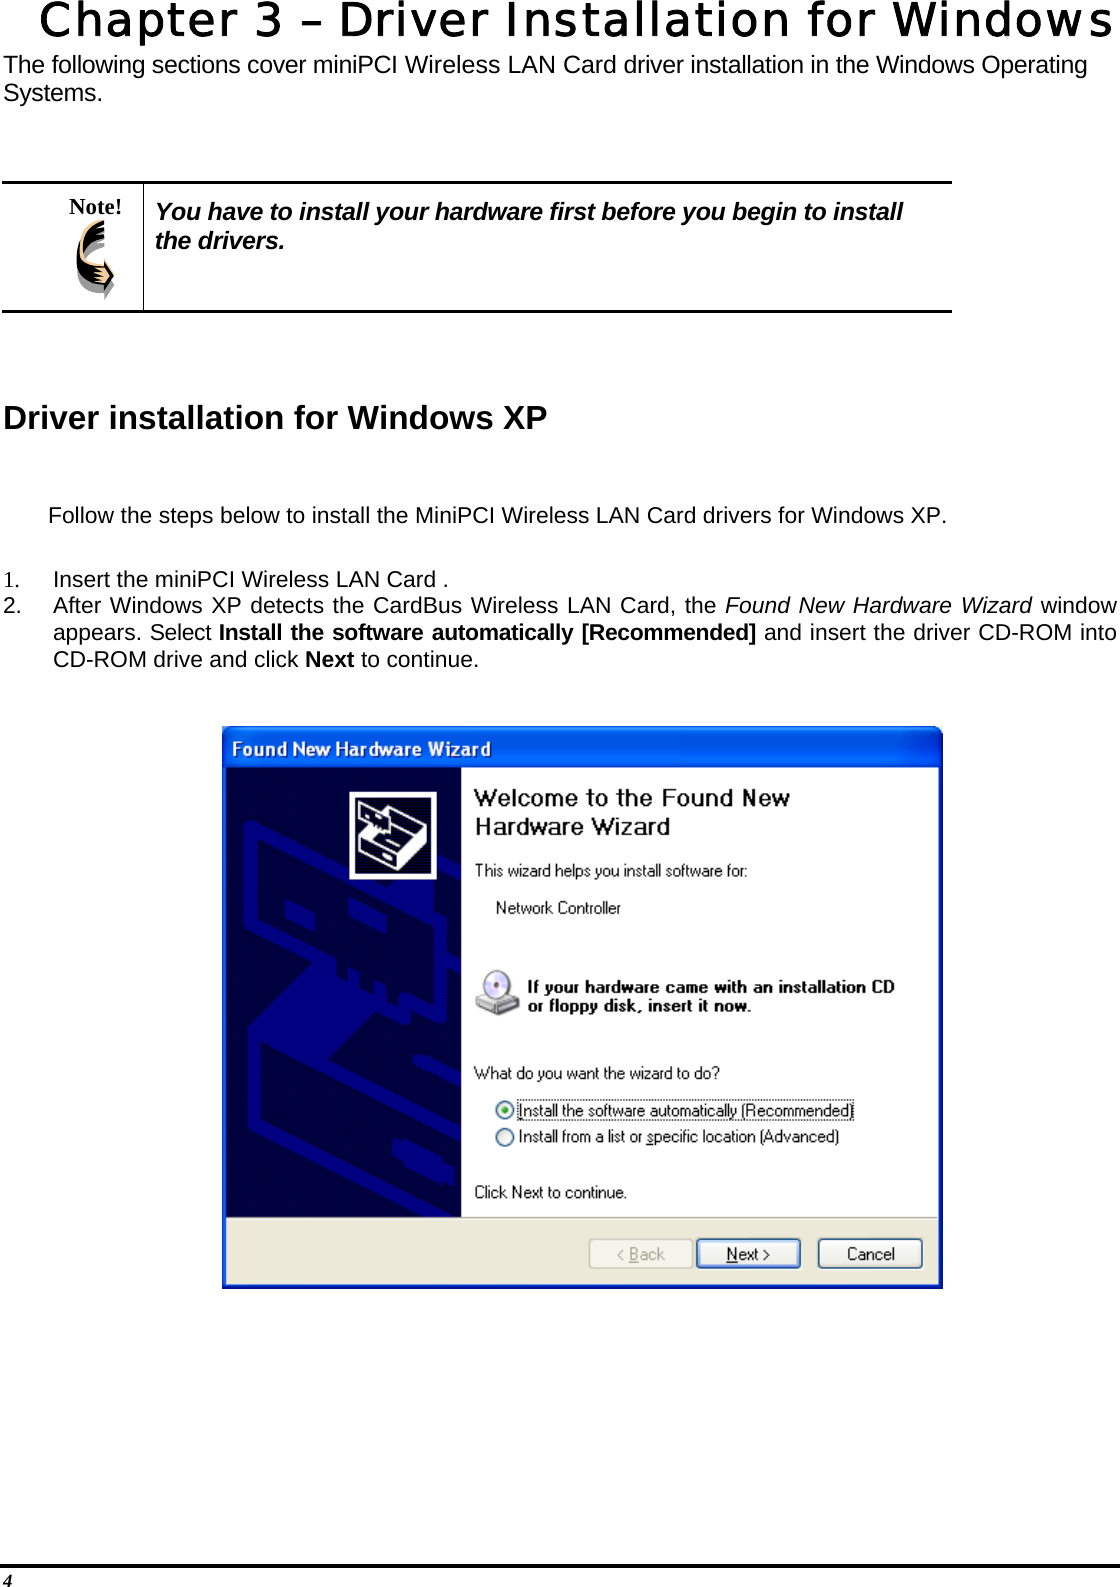  4 Chapter 3 – Driver Installation for Windows The following sections cover miniPCI Wireless LAN Card driver installation in the Windows Operating Systems.   Note!  You have to install your hardware first before you begin to install the drivers.   Driver installation for Windows XP  Follow the steps below to install the MiniPCI Wireless LAN Card drivers for Windows XP.  1.  Insert the miniPCI Wireless LAN Card . 2.  After Windows XP detects the CardBus Wireless LAN Card, the Found New Hardware Wizard window appears. Select Install the software automatically [Recommended] and insert the driver CD-ROM into CD-ROM drive and click Next to continue.        